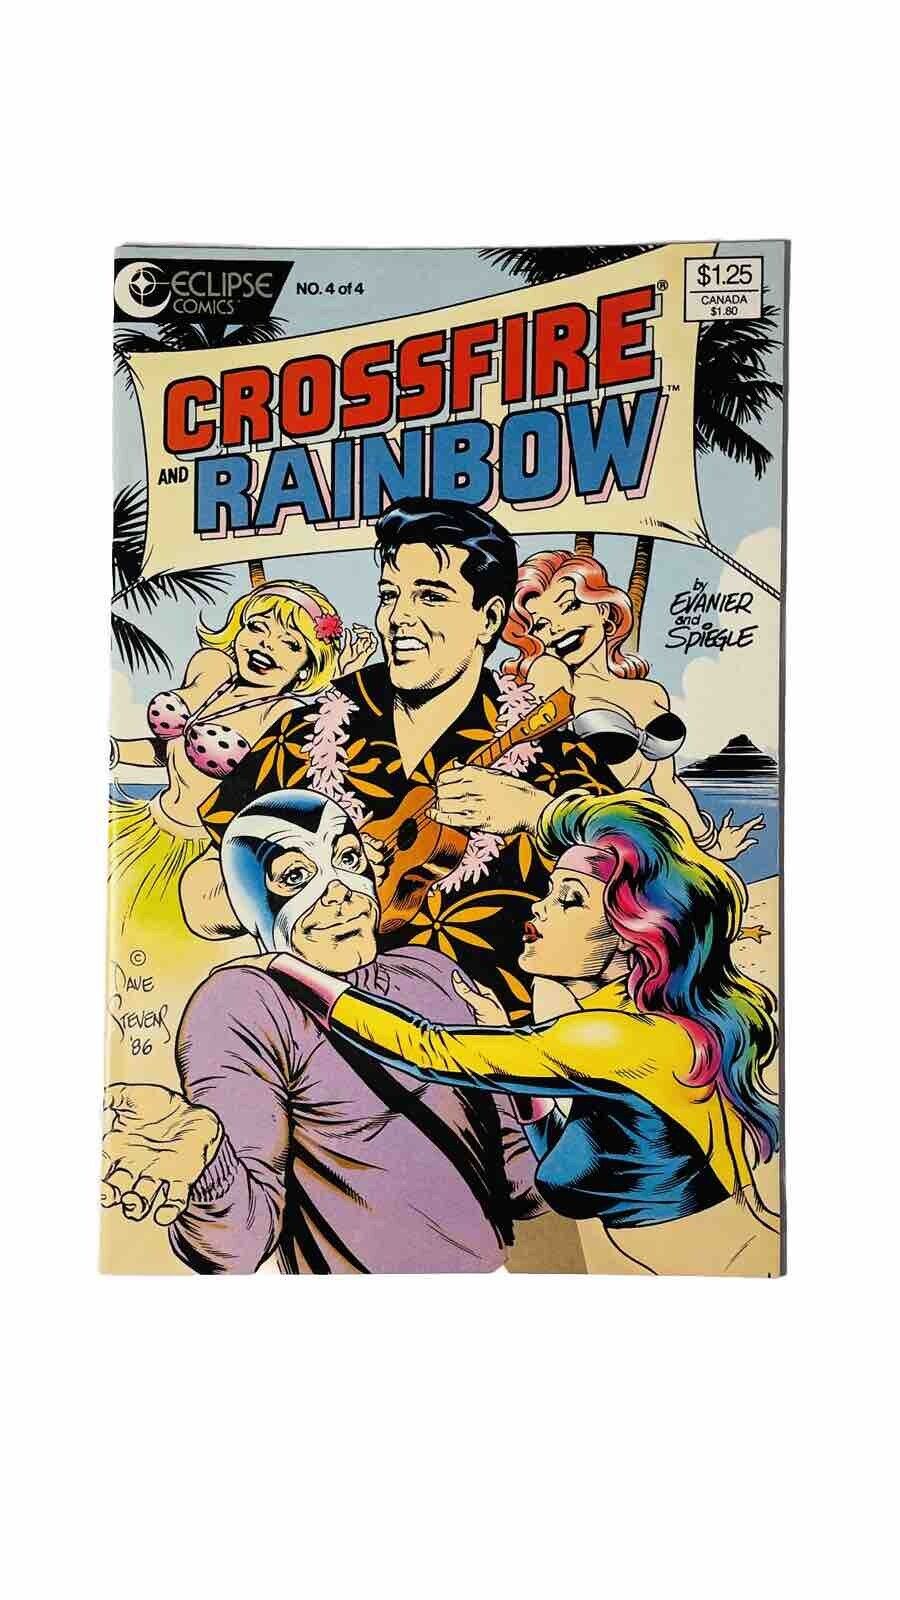 CROSSFIRE AND RAINBOW #4, VF/NM, Elvis, Dave Stevens, Eclipse 1986